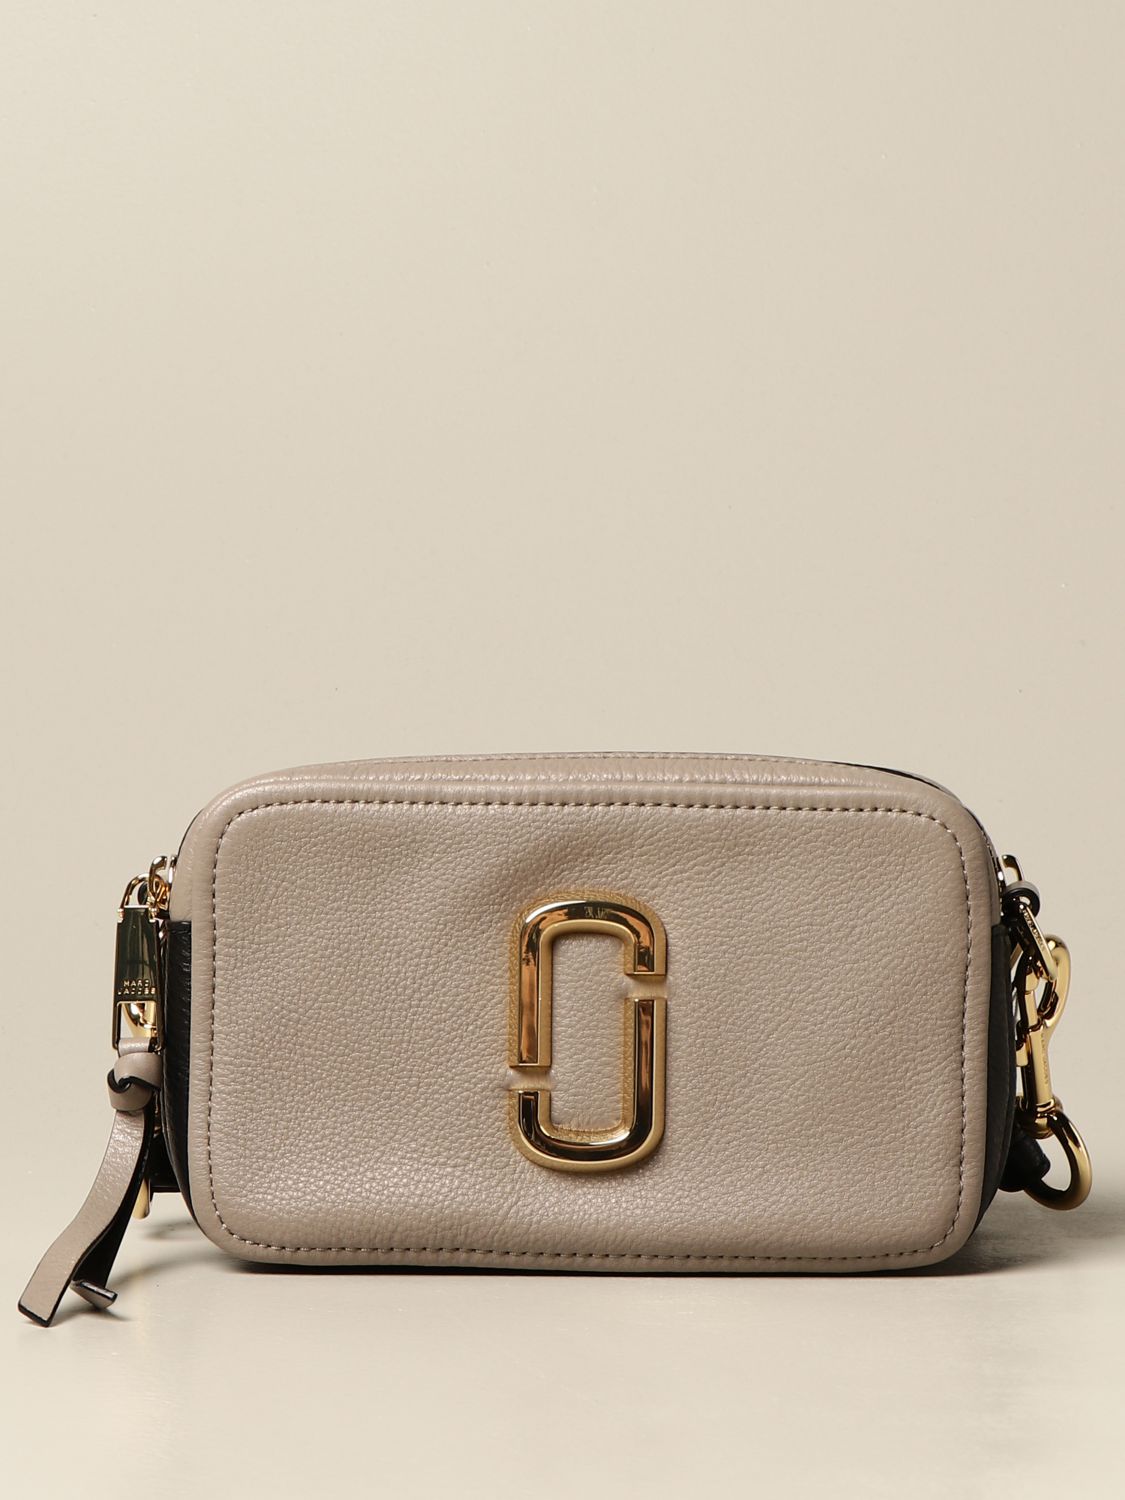 Marc Jacobs The Softshot 21 Leather Crossbody Bag in Brown